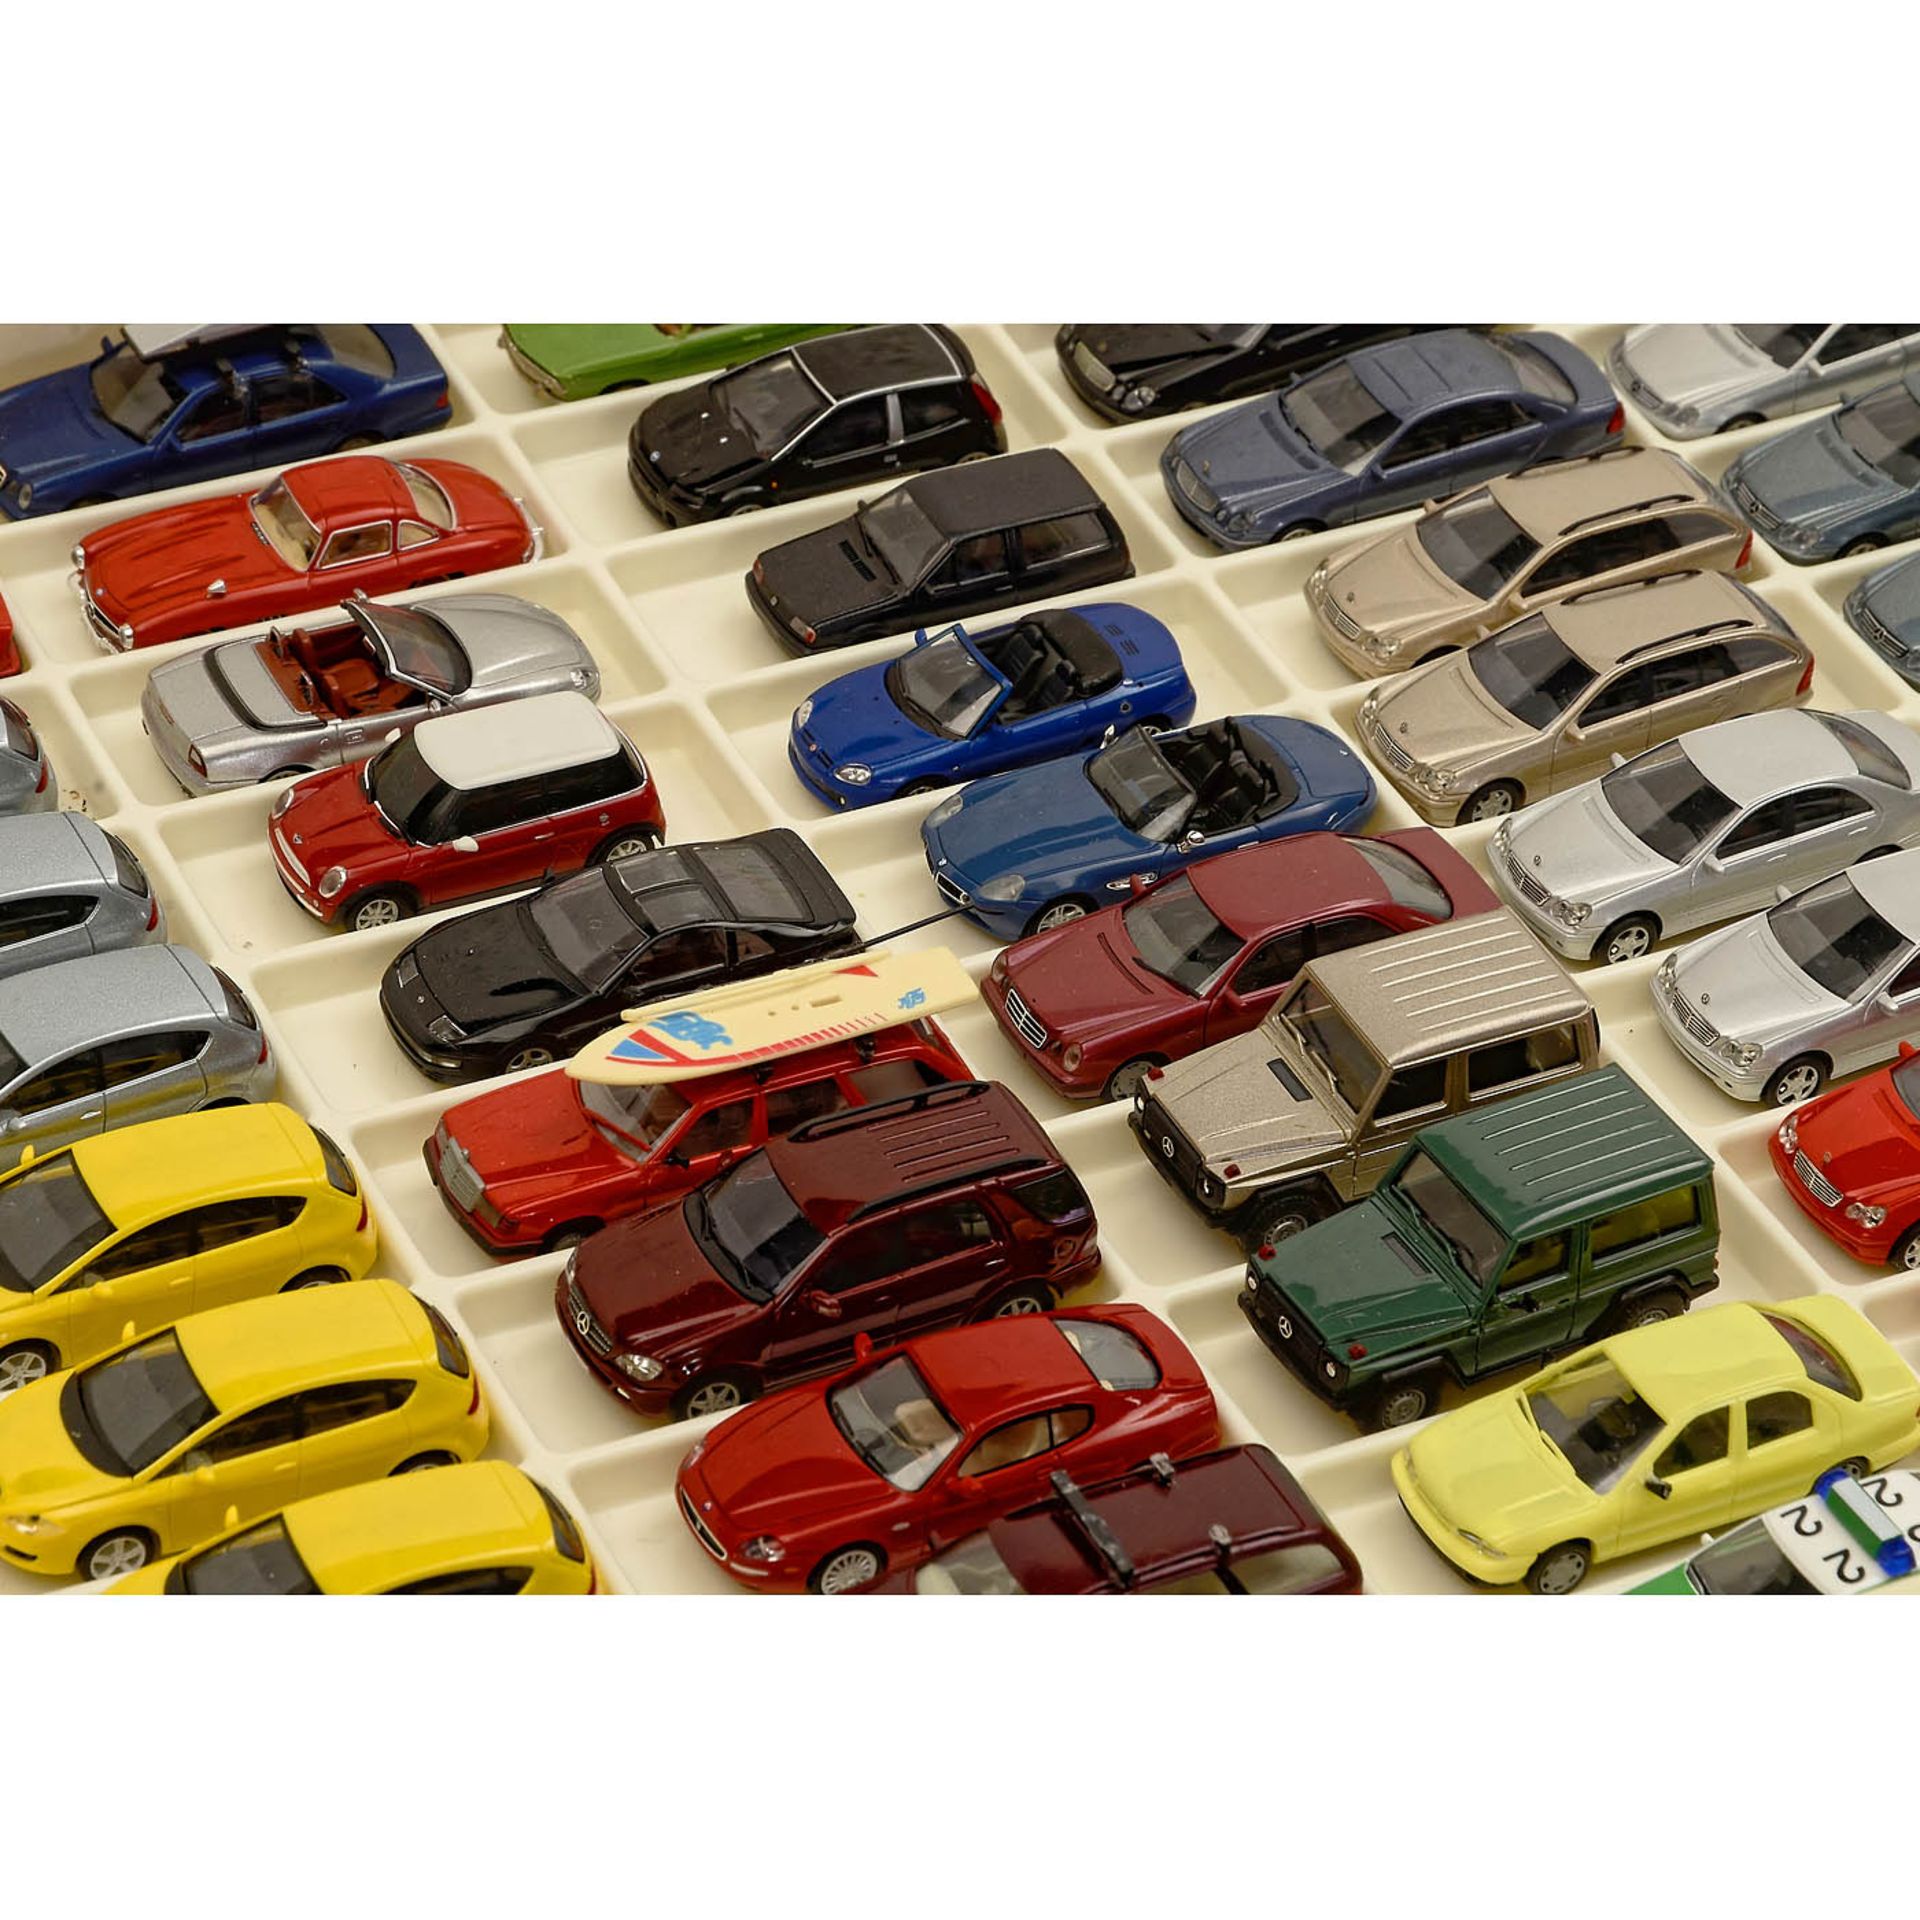 Large Collection of 1:87 Scale Model Cars - Image 9 of 9